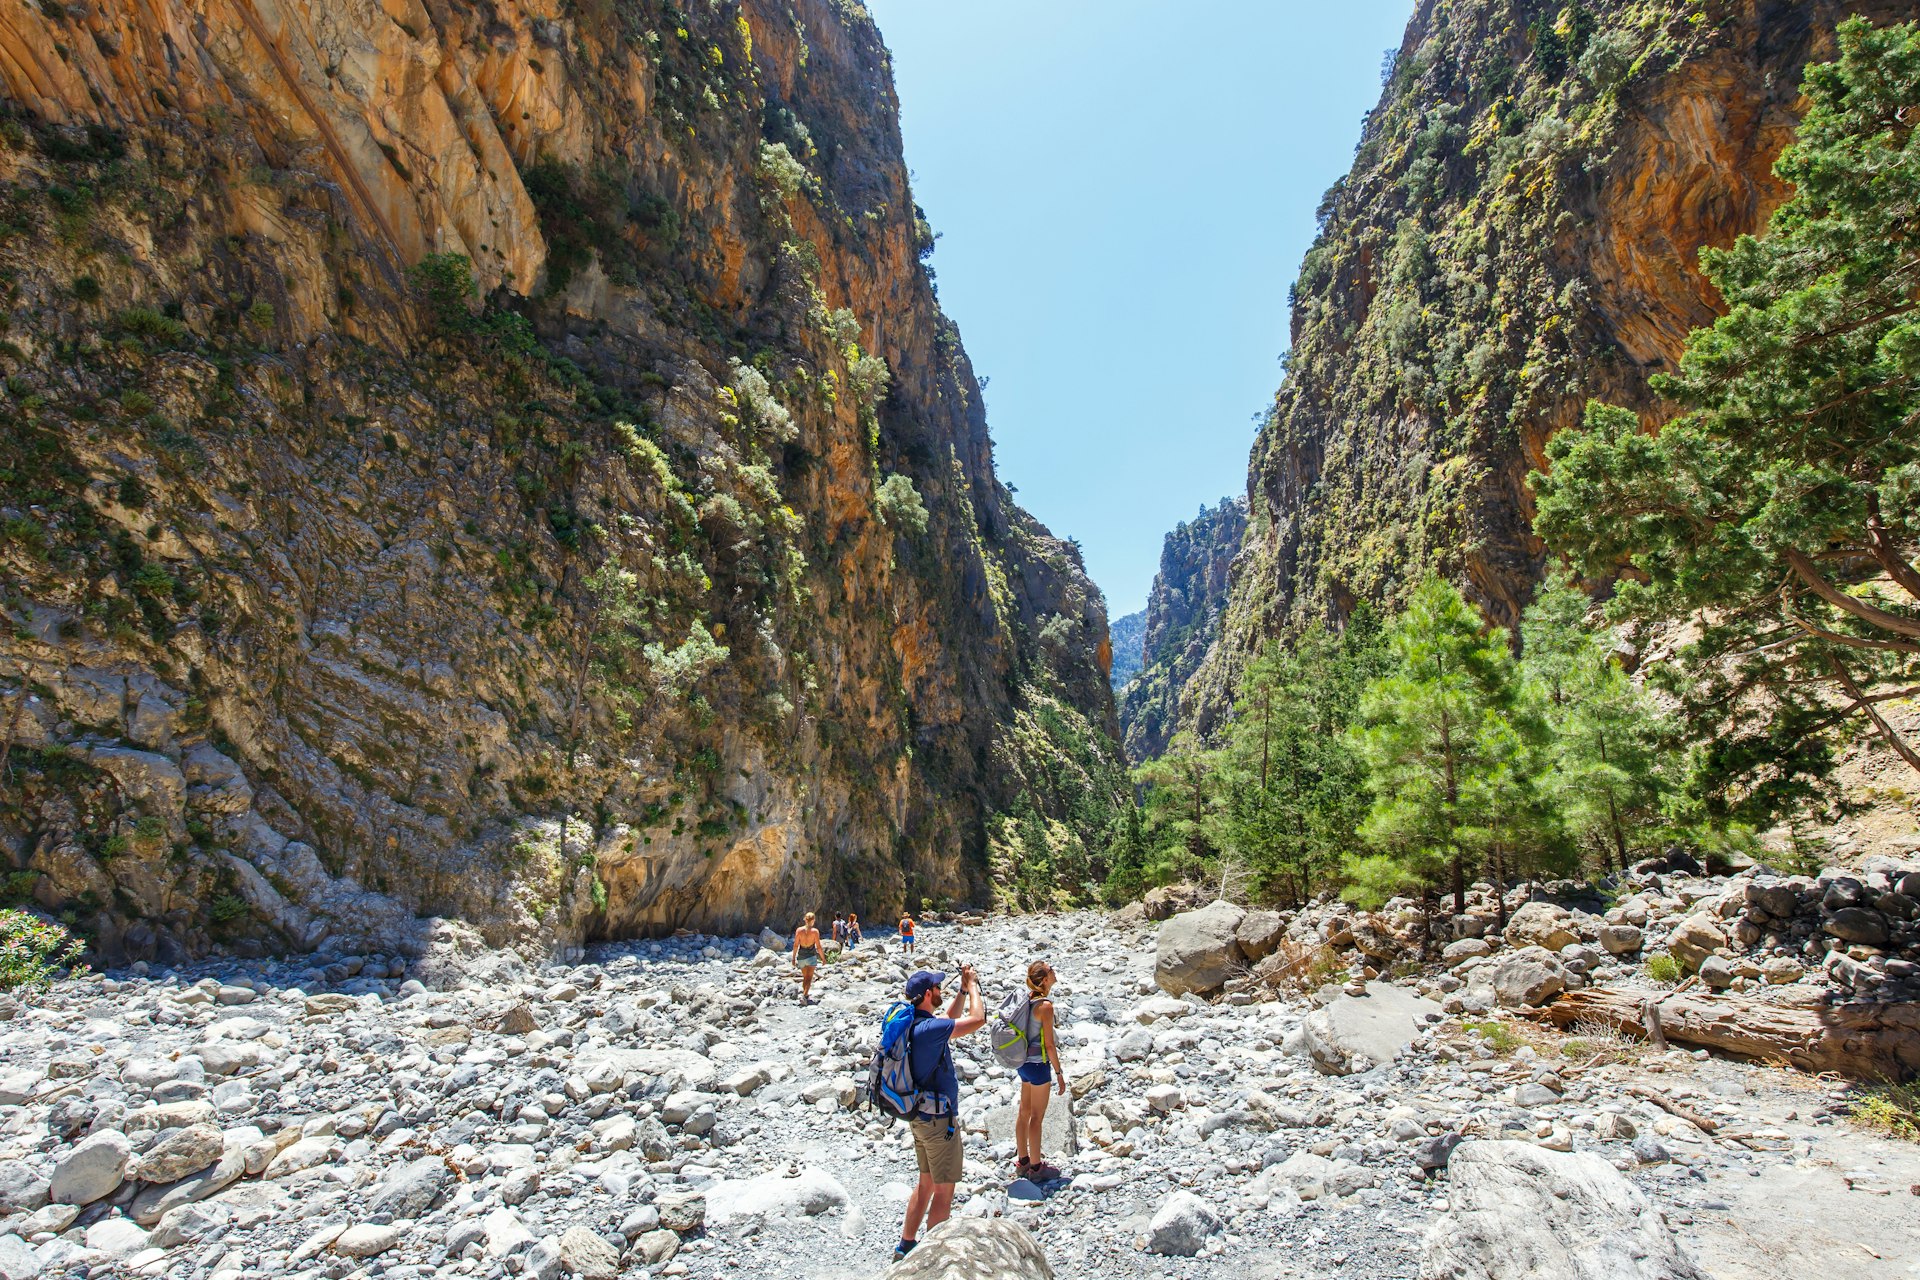 Tourists hike through Samaria Gorge in central Crete. The rocky walls of the gorge loom large in the background, making the hikers look very small.